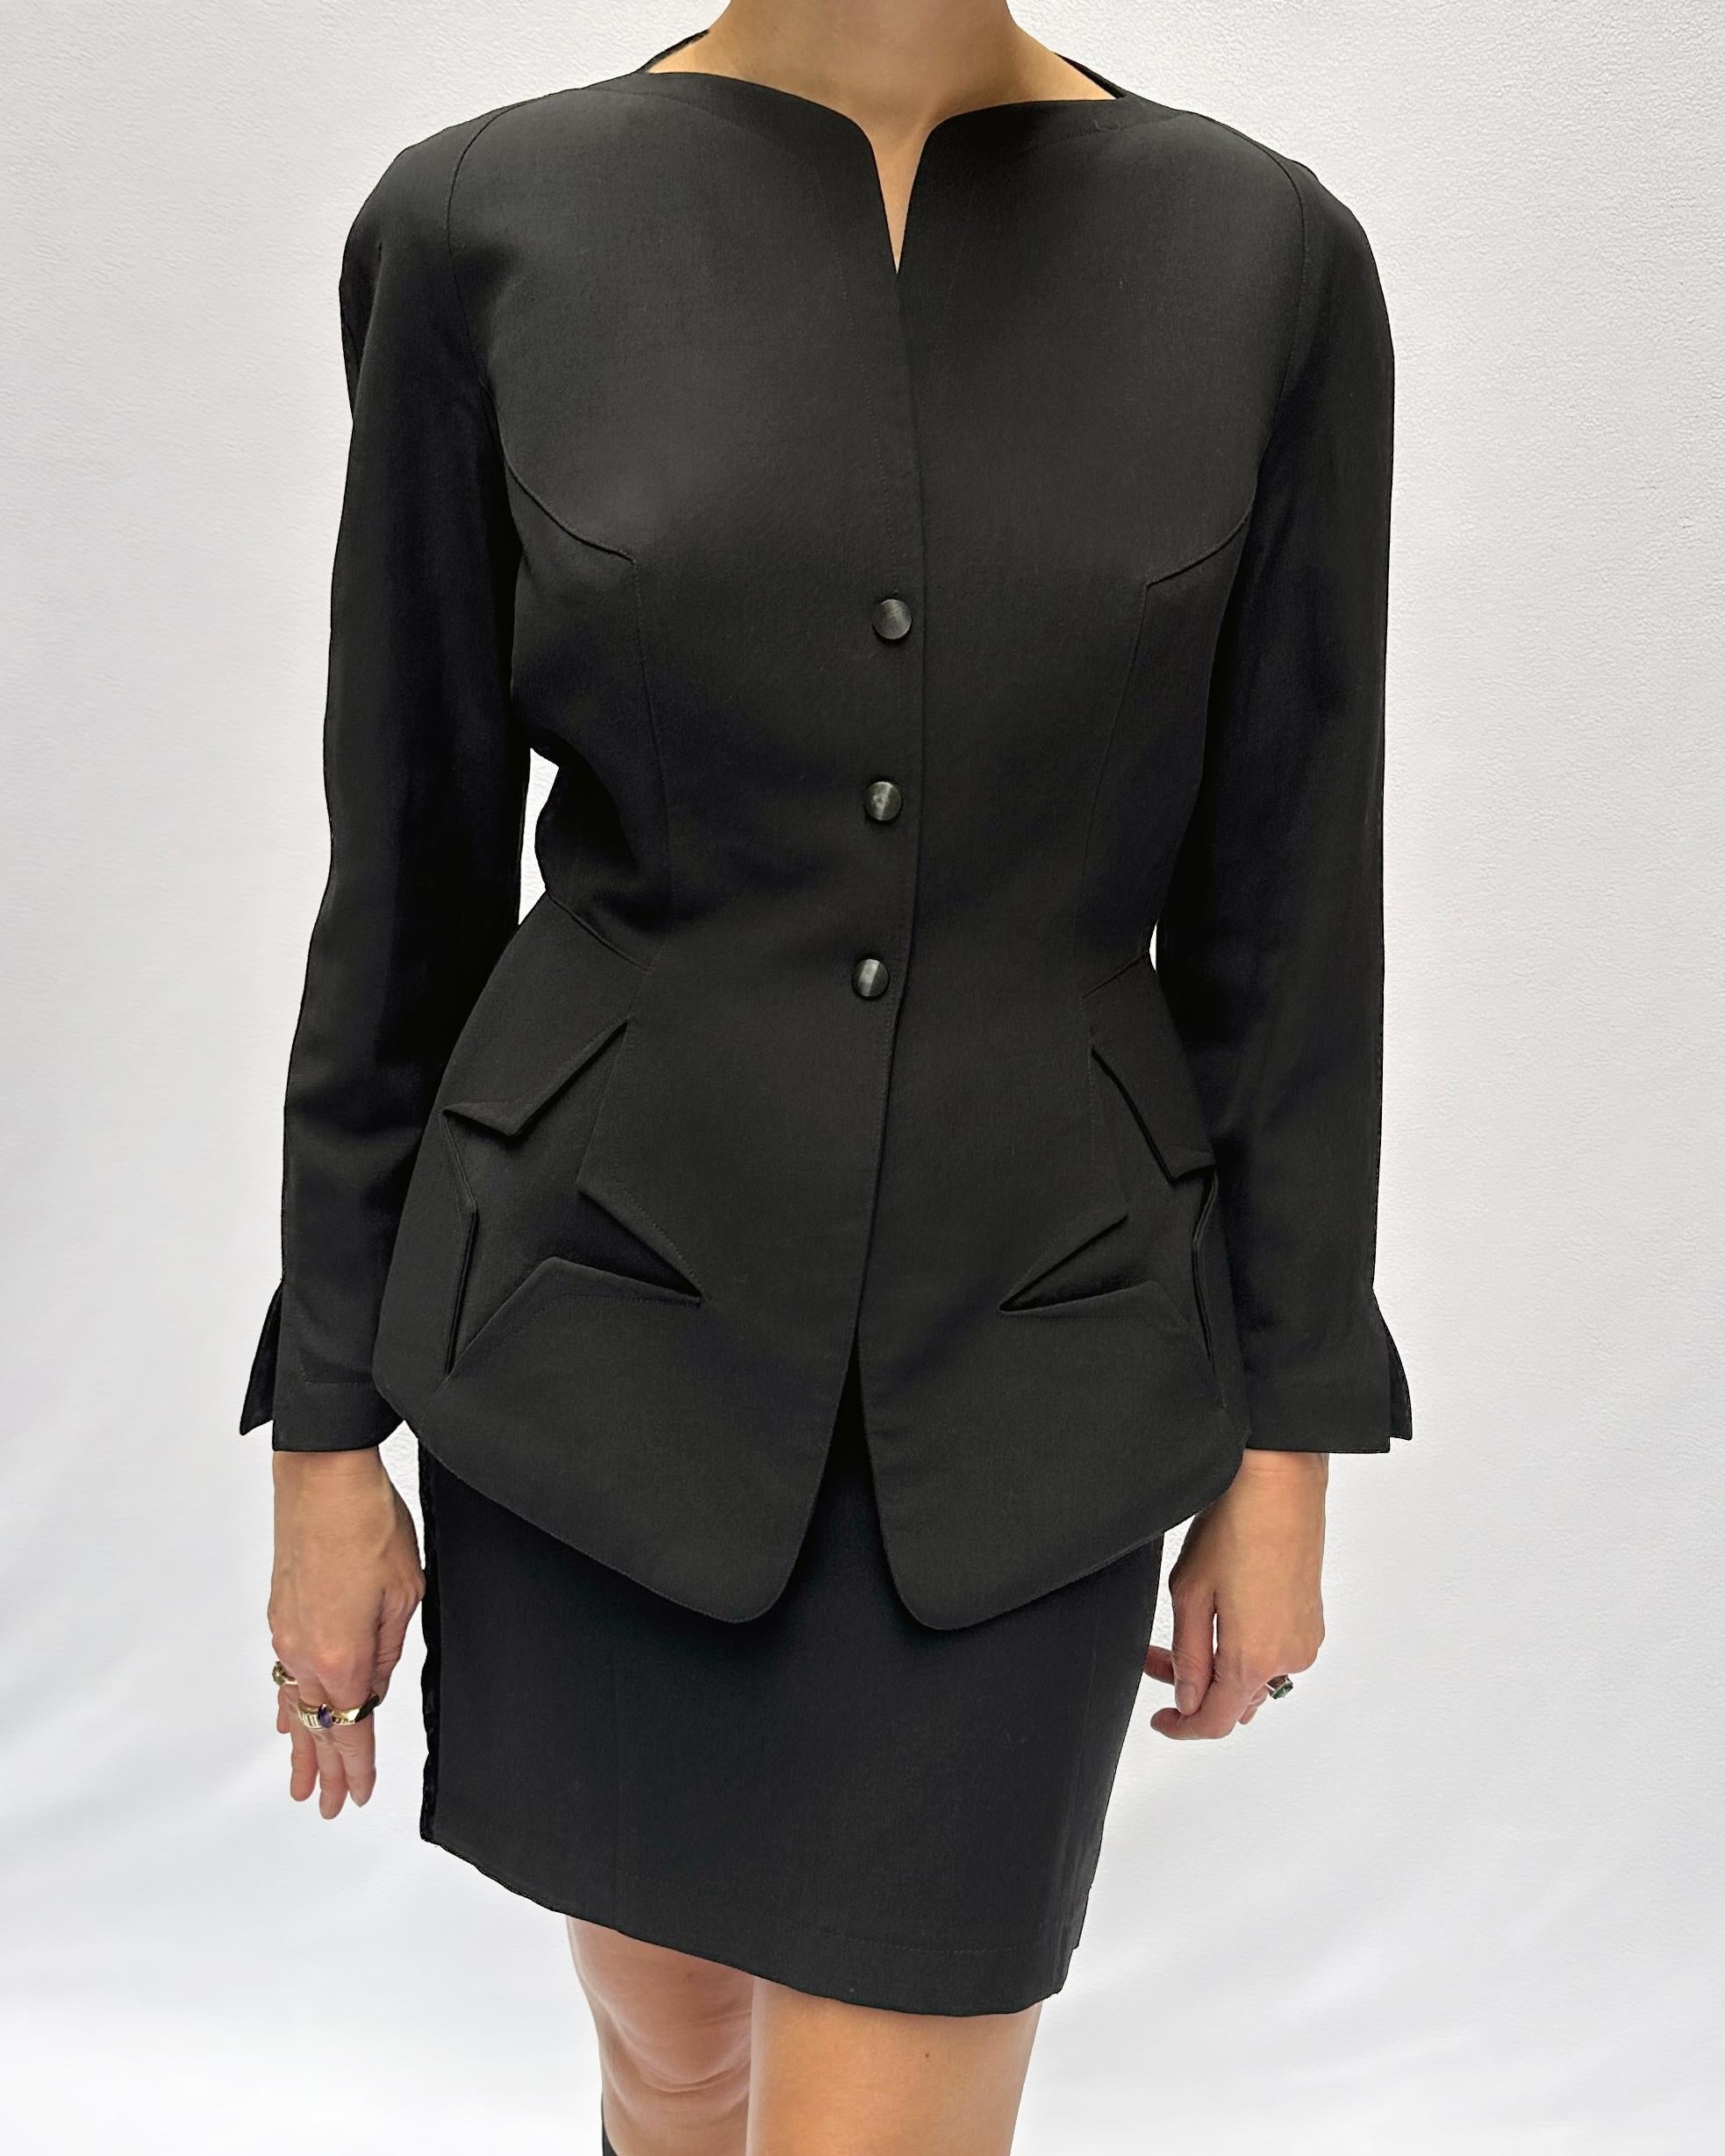 This vintage Thierry Mugler skirt suit (circa 1990) is instantly recognizable by its unique star cut-out pockets, a signature Mugler emblem, incorporated in a design only he was clever enough to achieve. Thierry Mugler and his work have been the